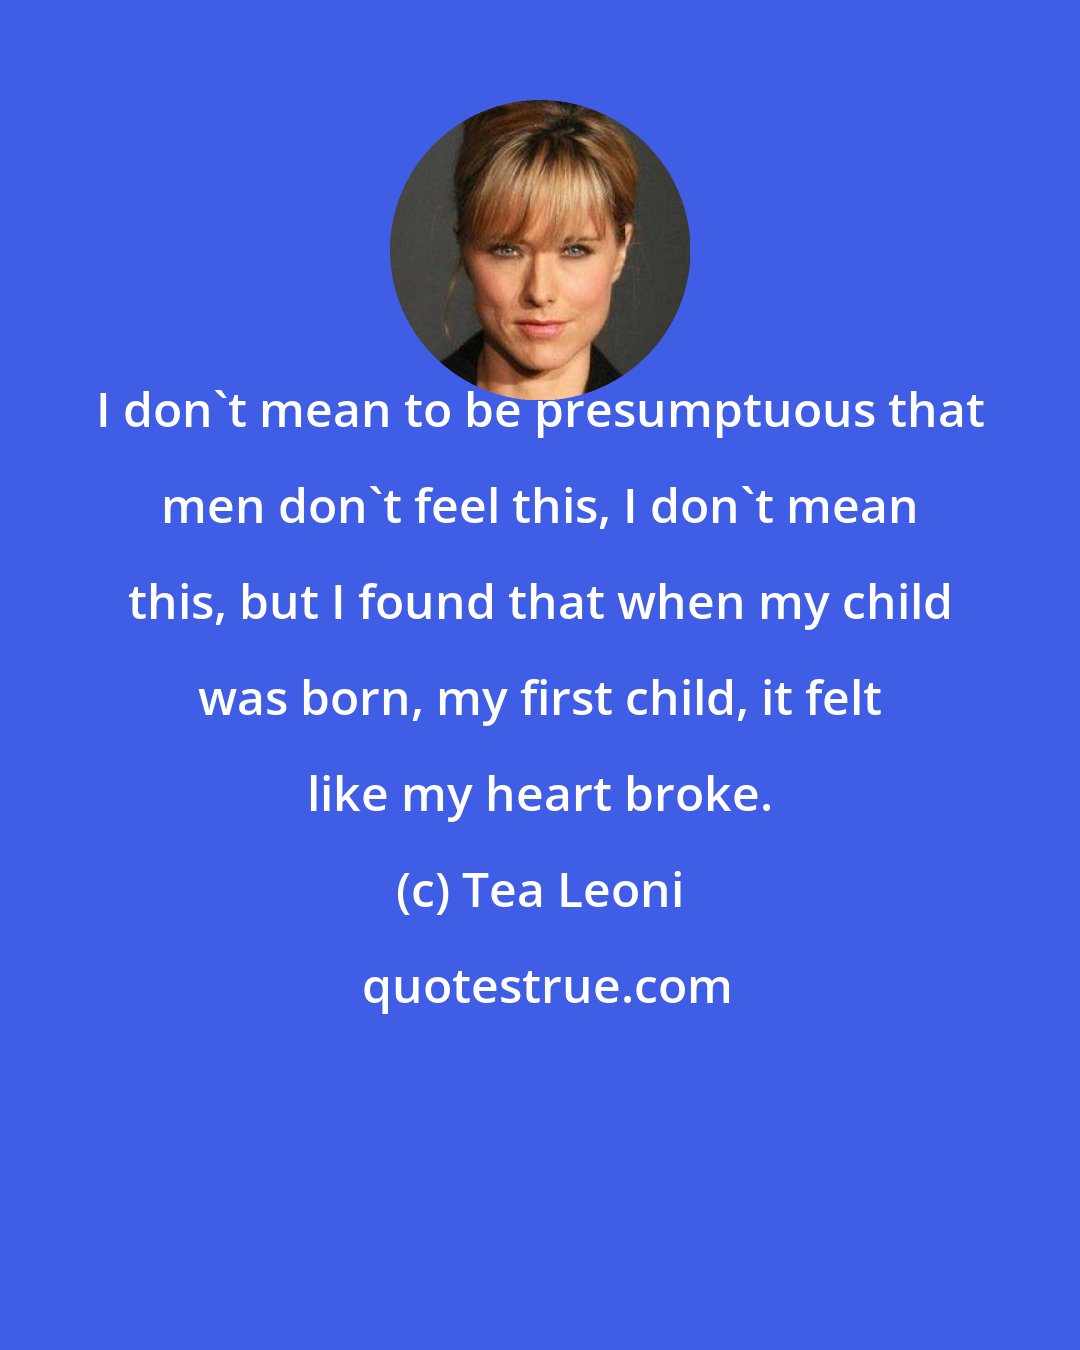 Tea Leoni: I don't mean to be presumptuous that men don't feel this, I don't mean this, but I found that when my child was born, my first child, it felt like my heart broke.